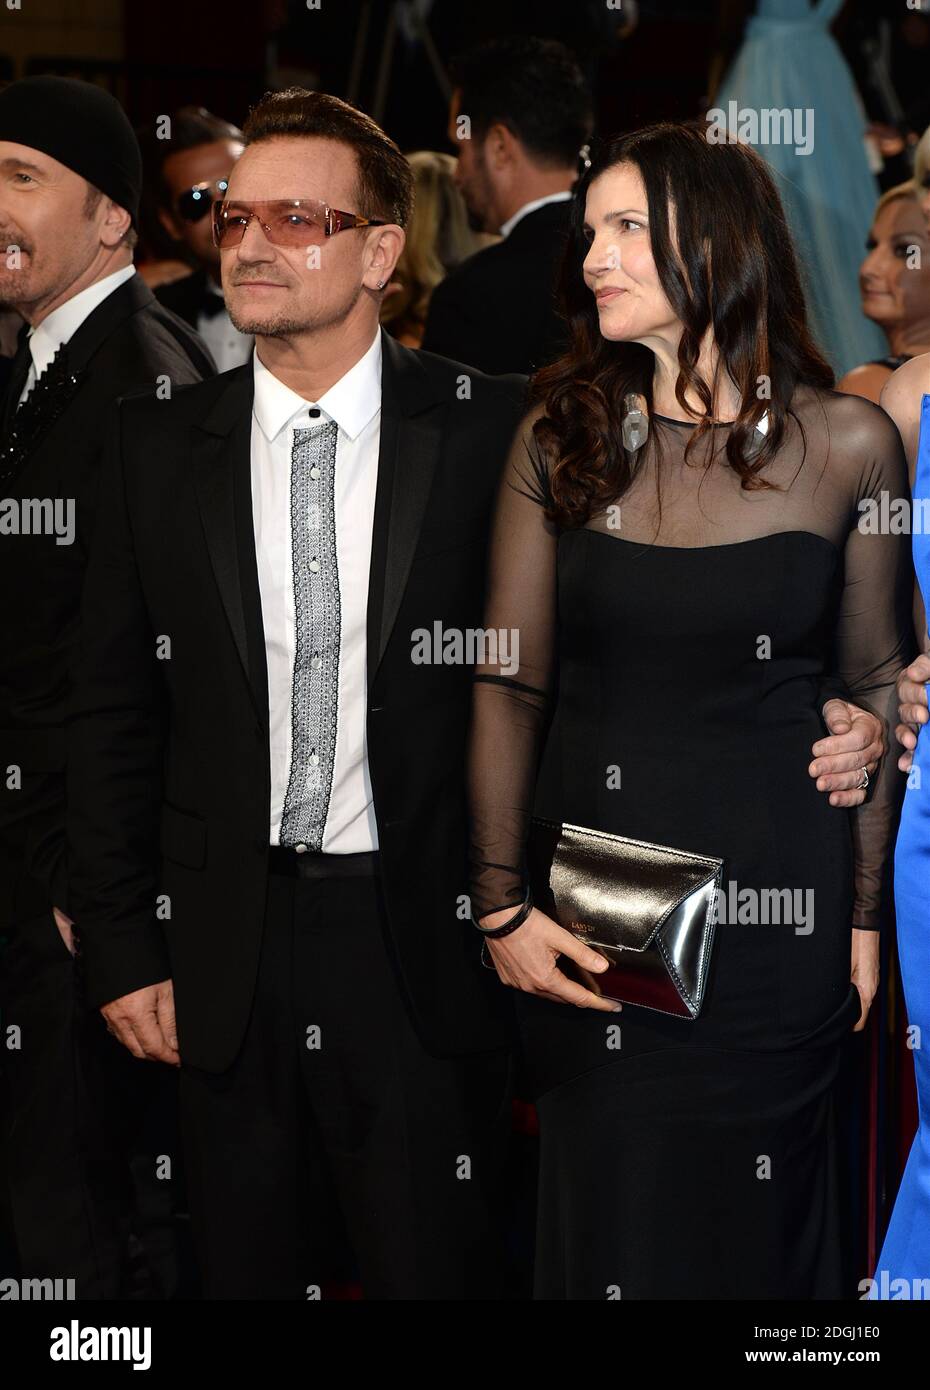 Bono and Ali Hewson arriving at the 86th Academy Awards held at the Dolby Theatre in Hollywood, Los Angeles, CA, USA, March 2, 2014. Stock Photo